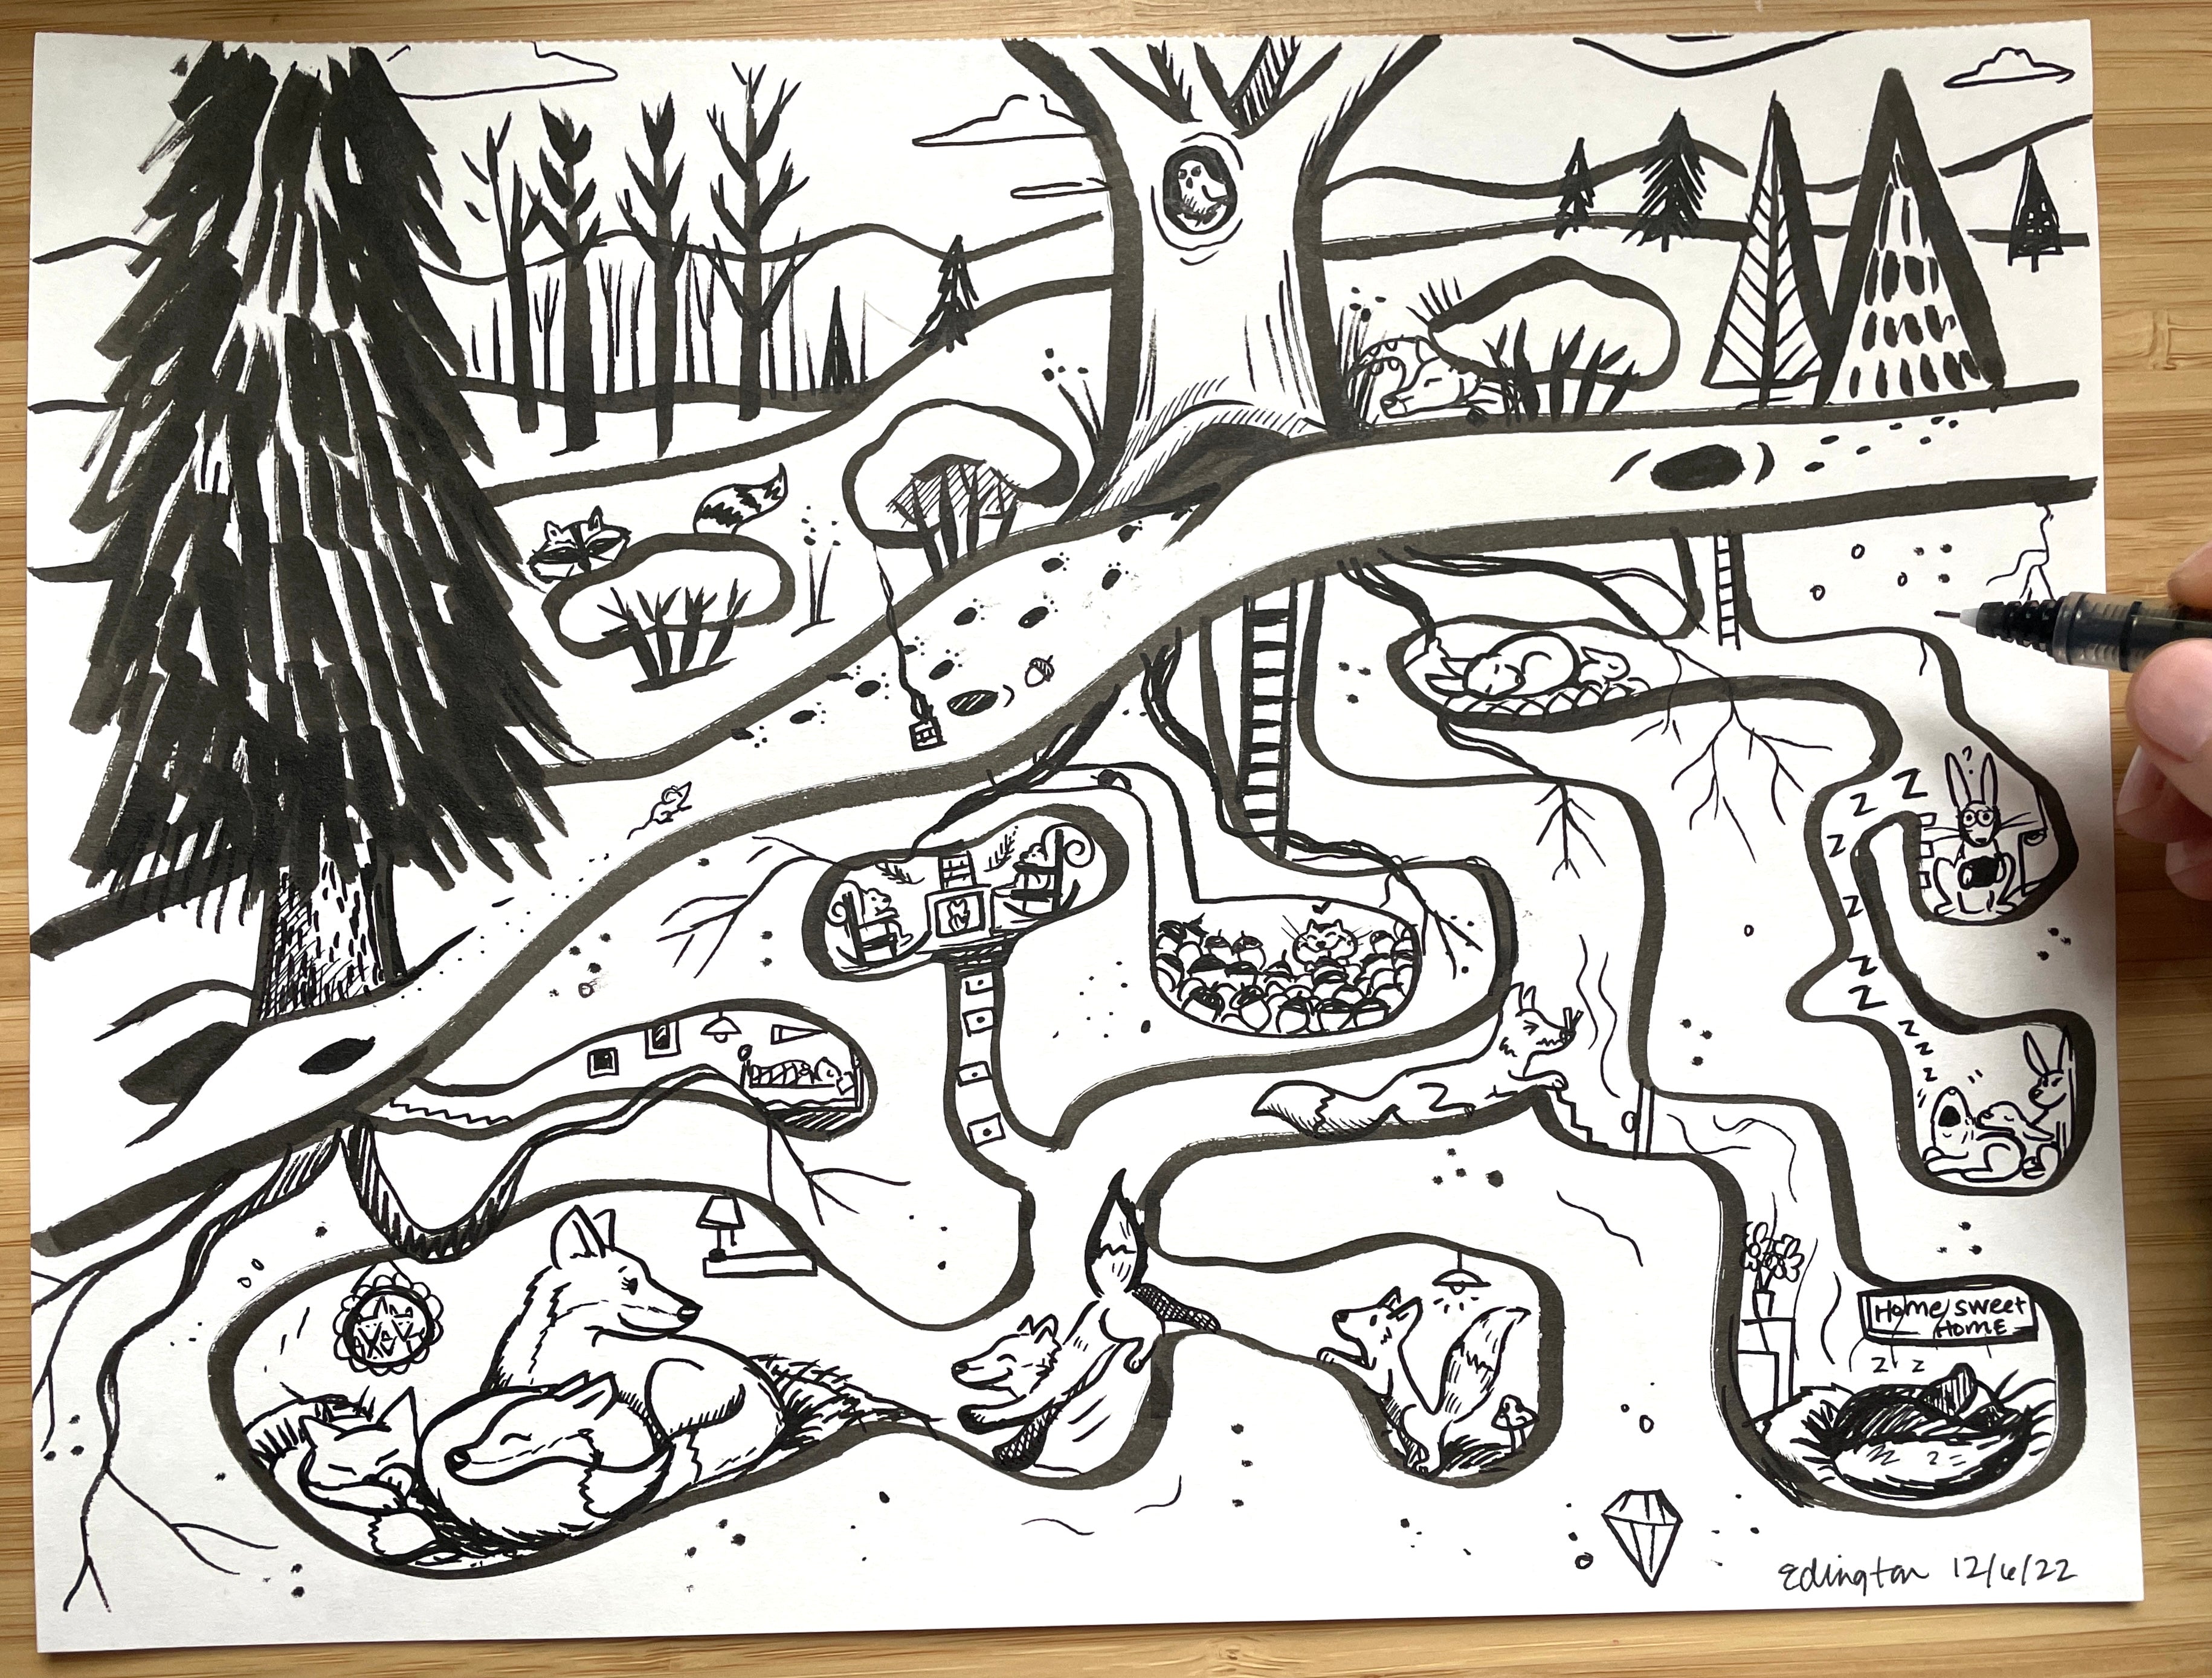 rabbit hole in the ground drawing